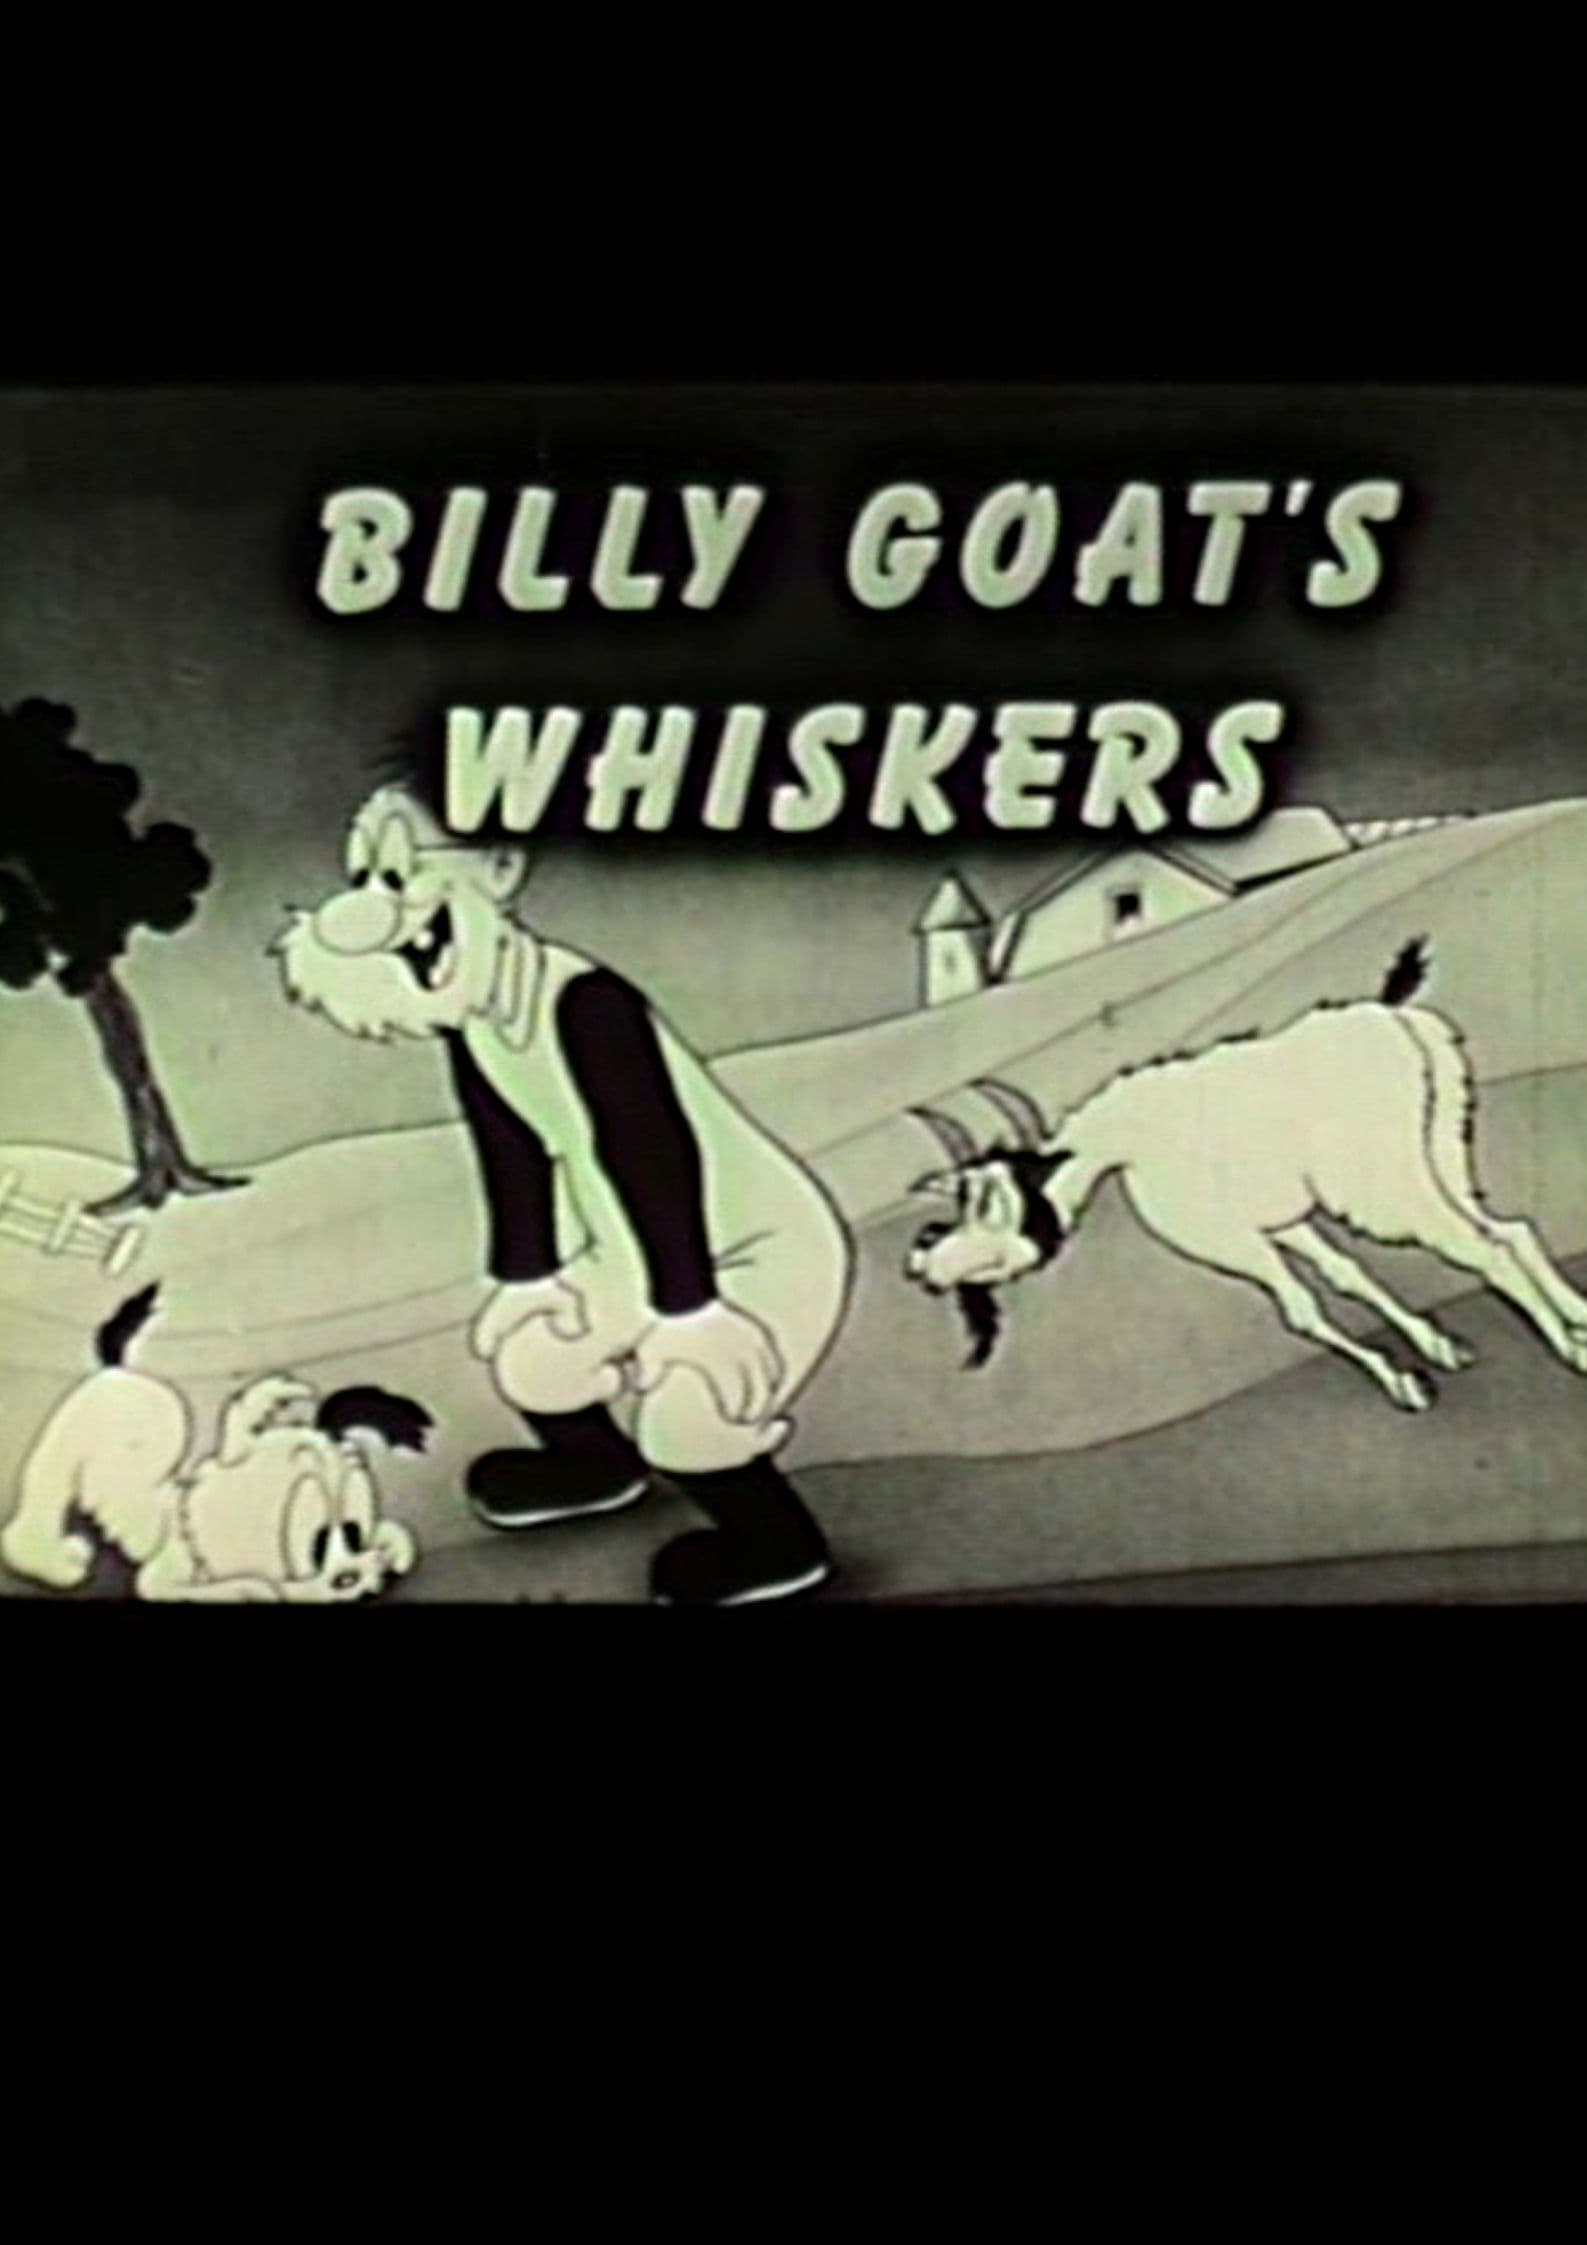 The Billy Goat's Whiskers